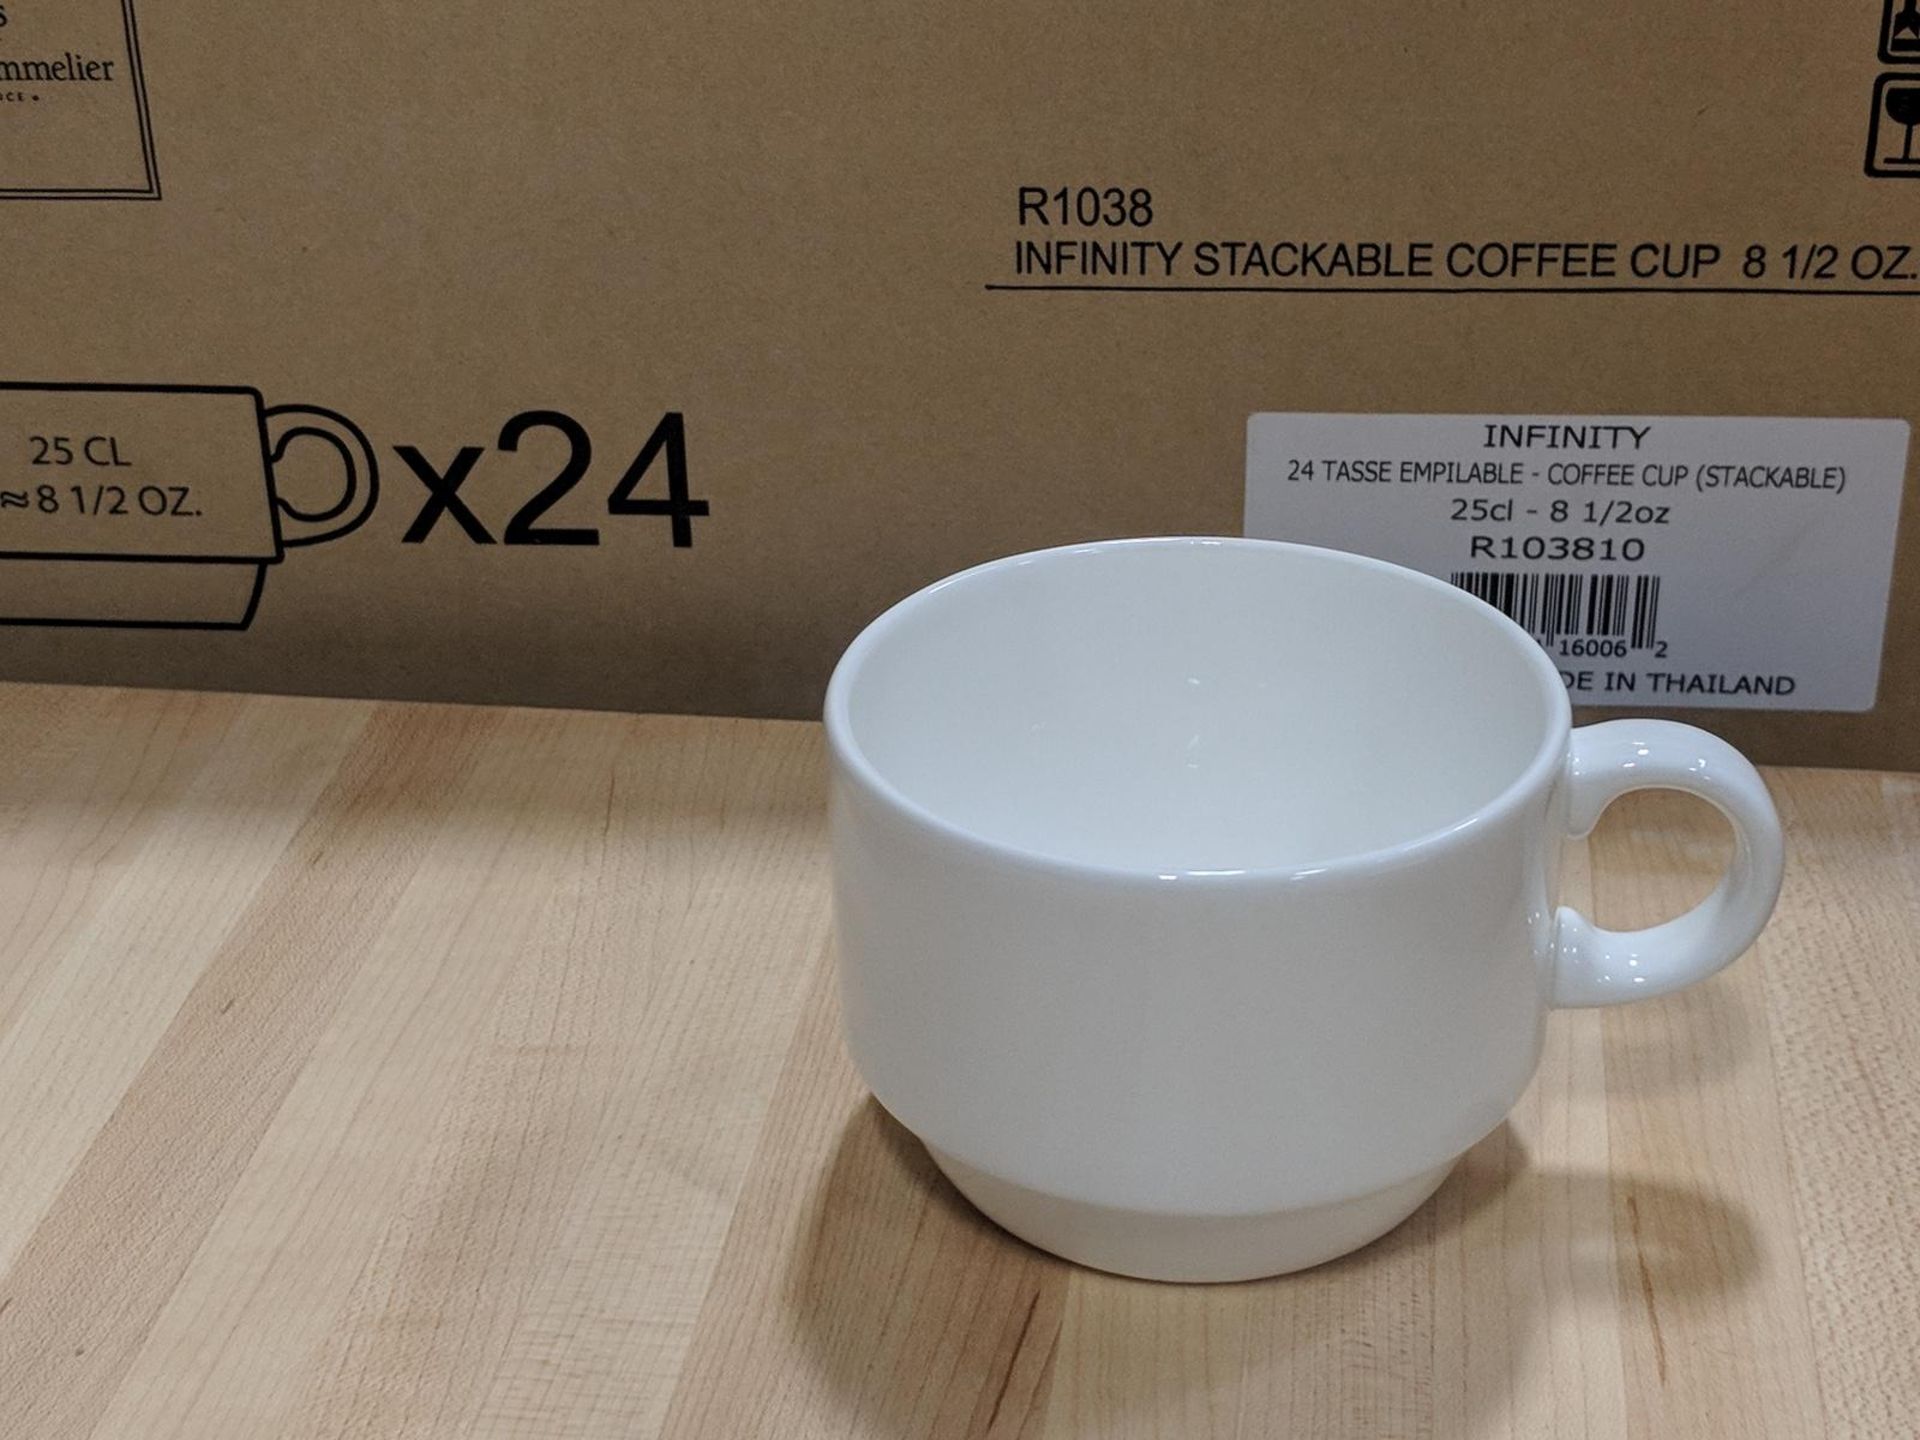 8.5oz Infinity Stacking Coffee Cups - Lot of 24 (1 Case), Arcoroc R1038